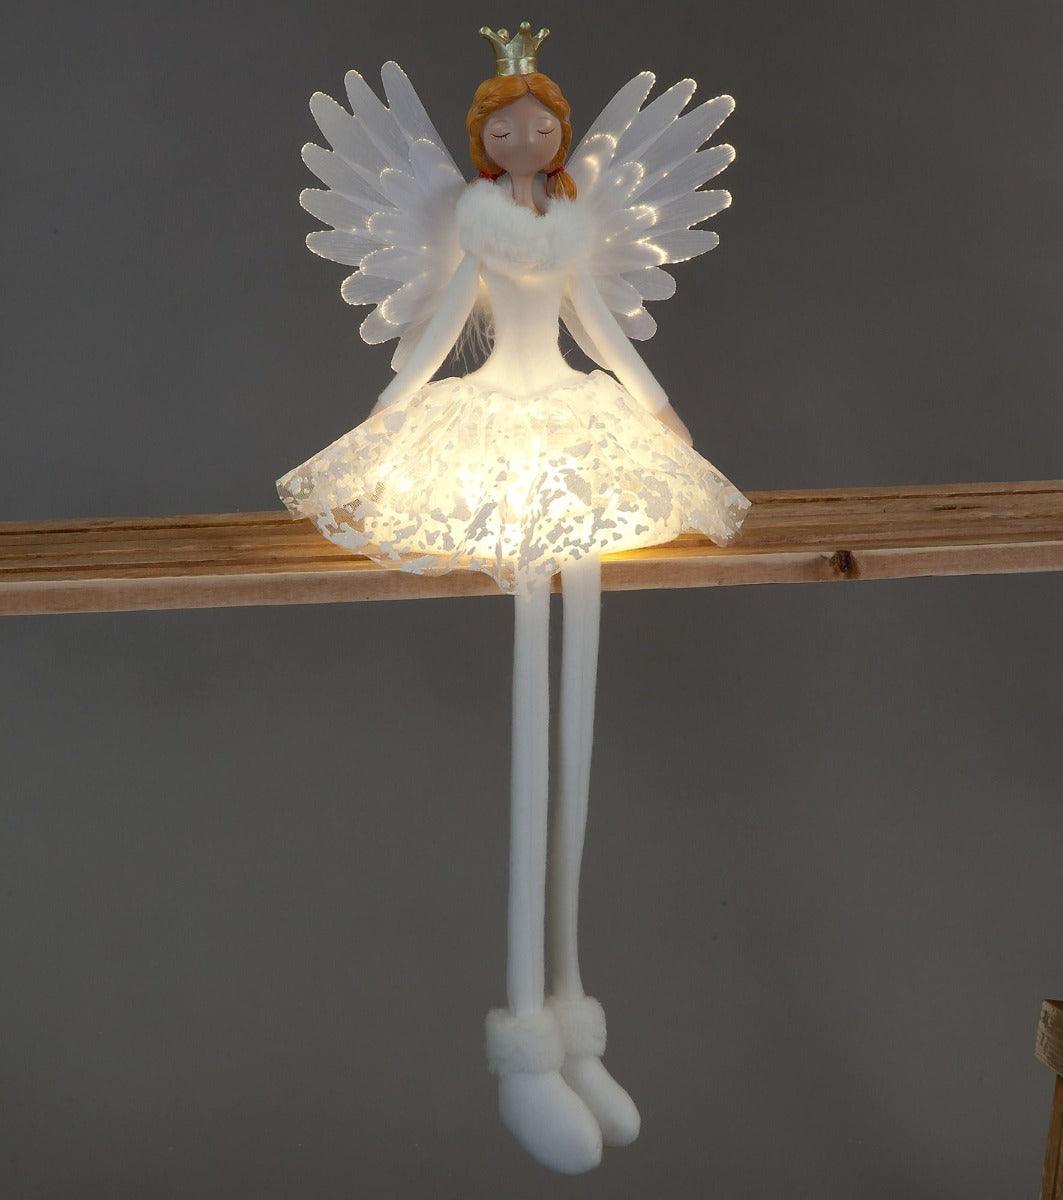 Snowtime 54cm Sitting Angel with Dangling Legs -White/Gold - Towsure